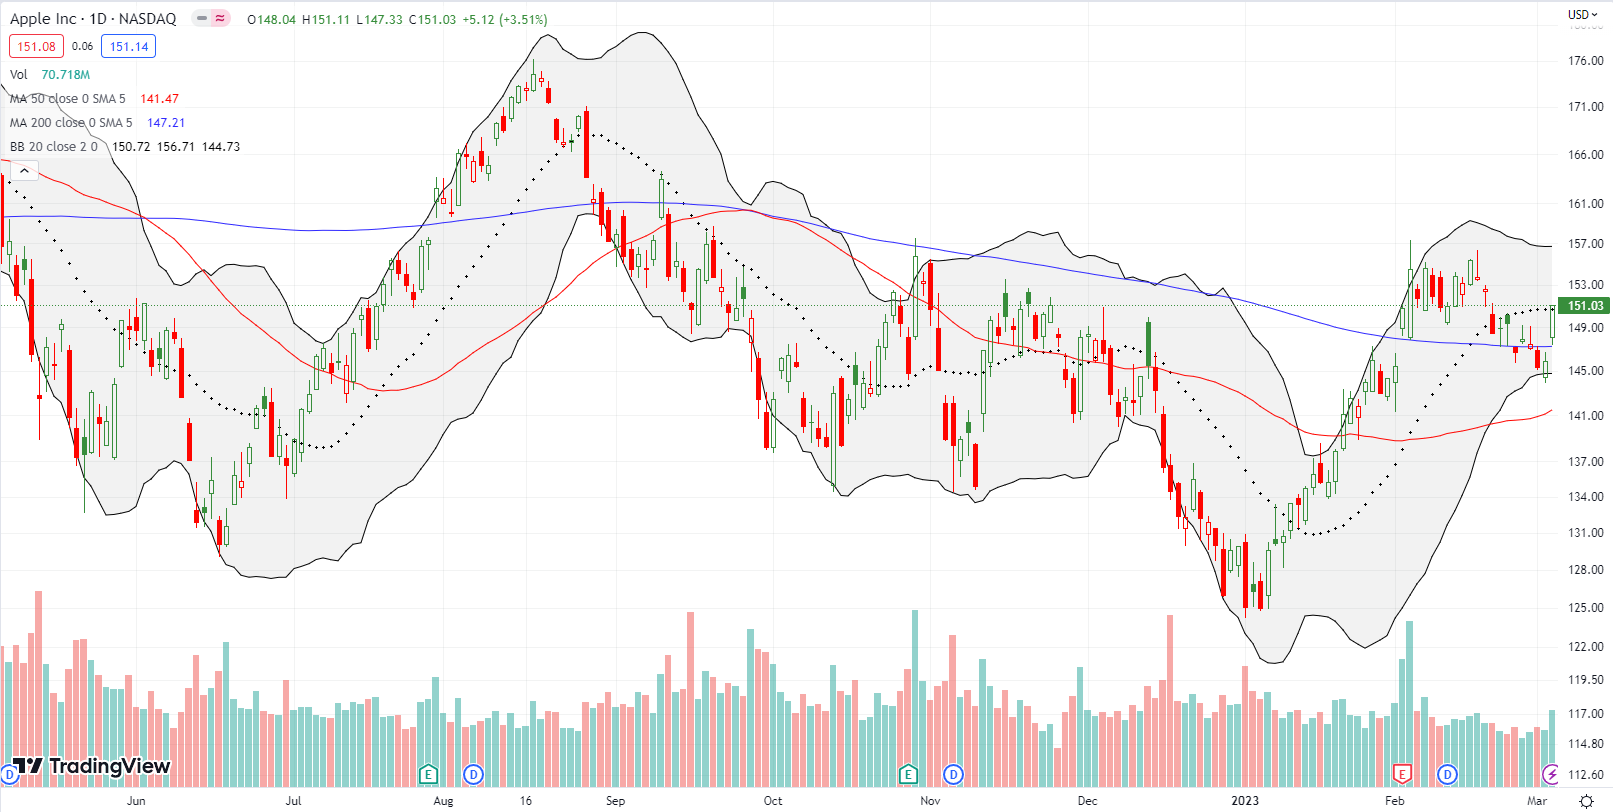 Apple Inc (AAPL) surged 3.5% and reestablished 200DMA support.